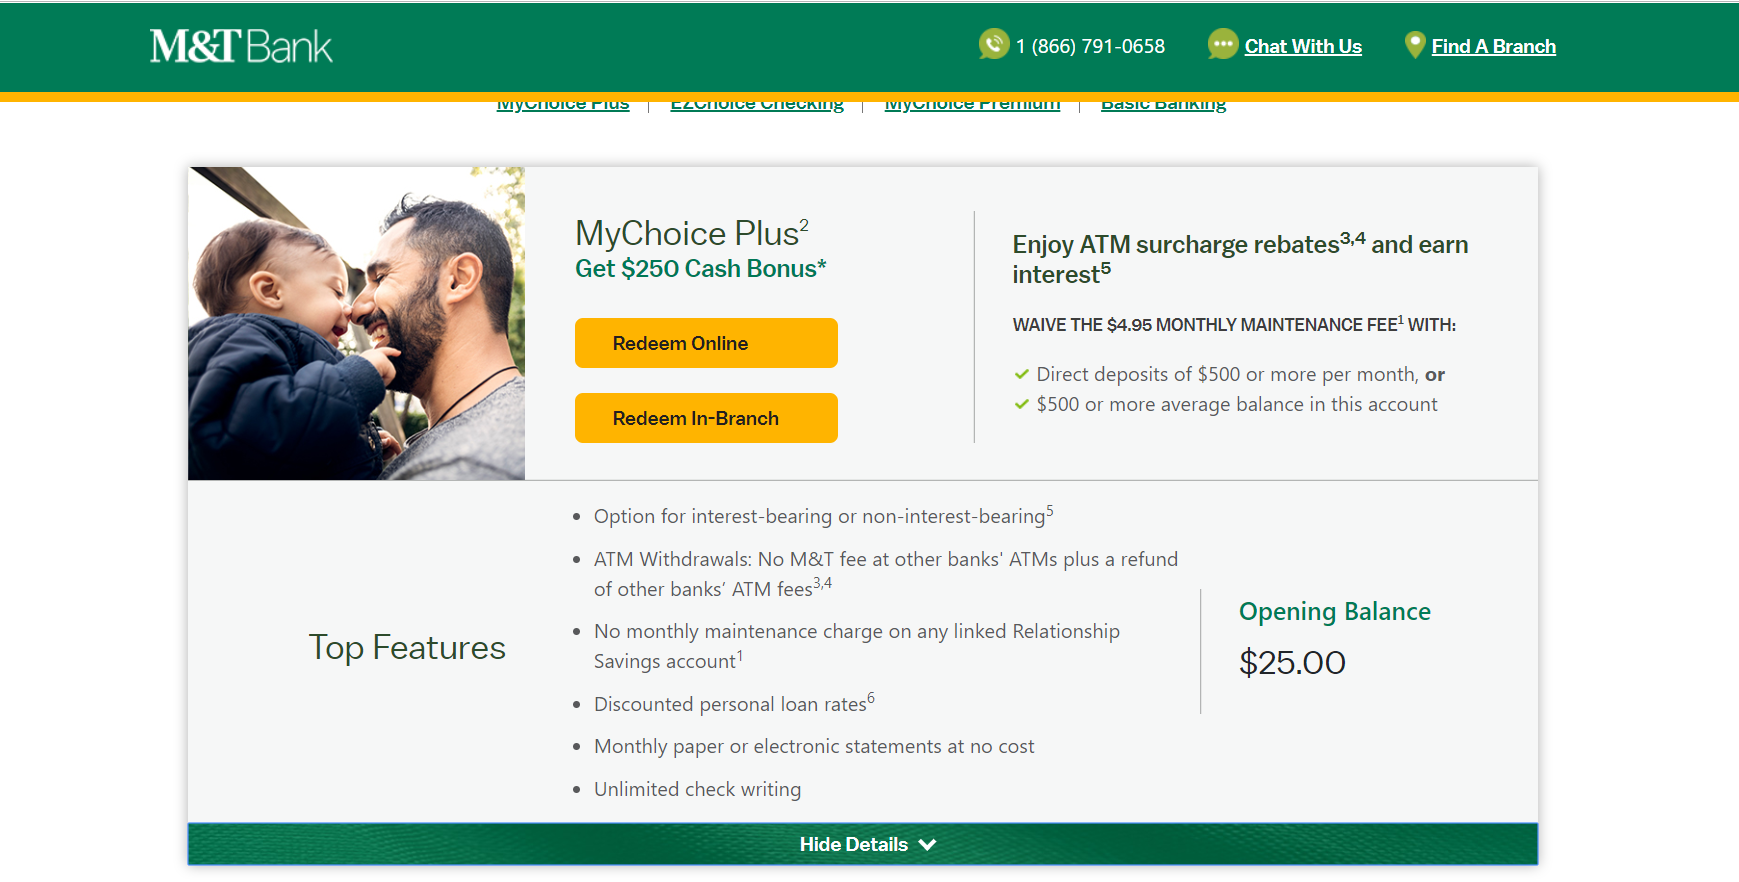 M&T BANK promo.png